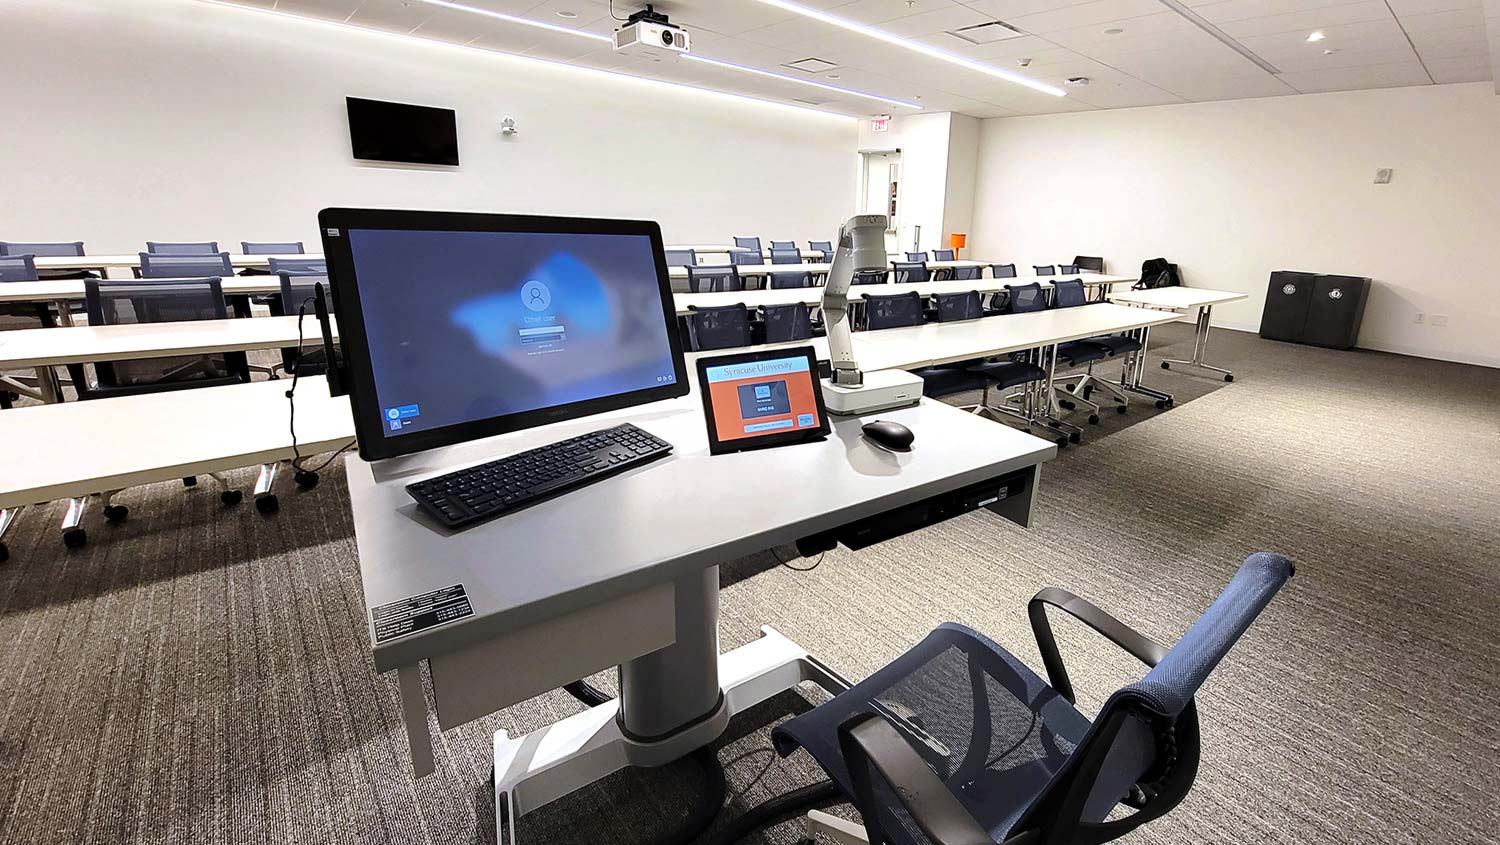 The standard classroom presentation workstation is a Steelcase AirTouch height-adjustable table outfitted with a micro-PC, an annotation touch screen, a Blu-ray player, a document camera, AV connectivity with power, and an Extron TLP Pro 1025T 10” Tabletop TouchLink Pro Touchpanel for system control.